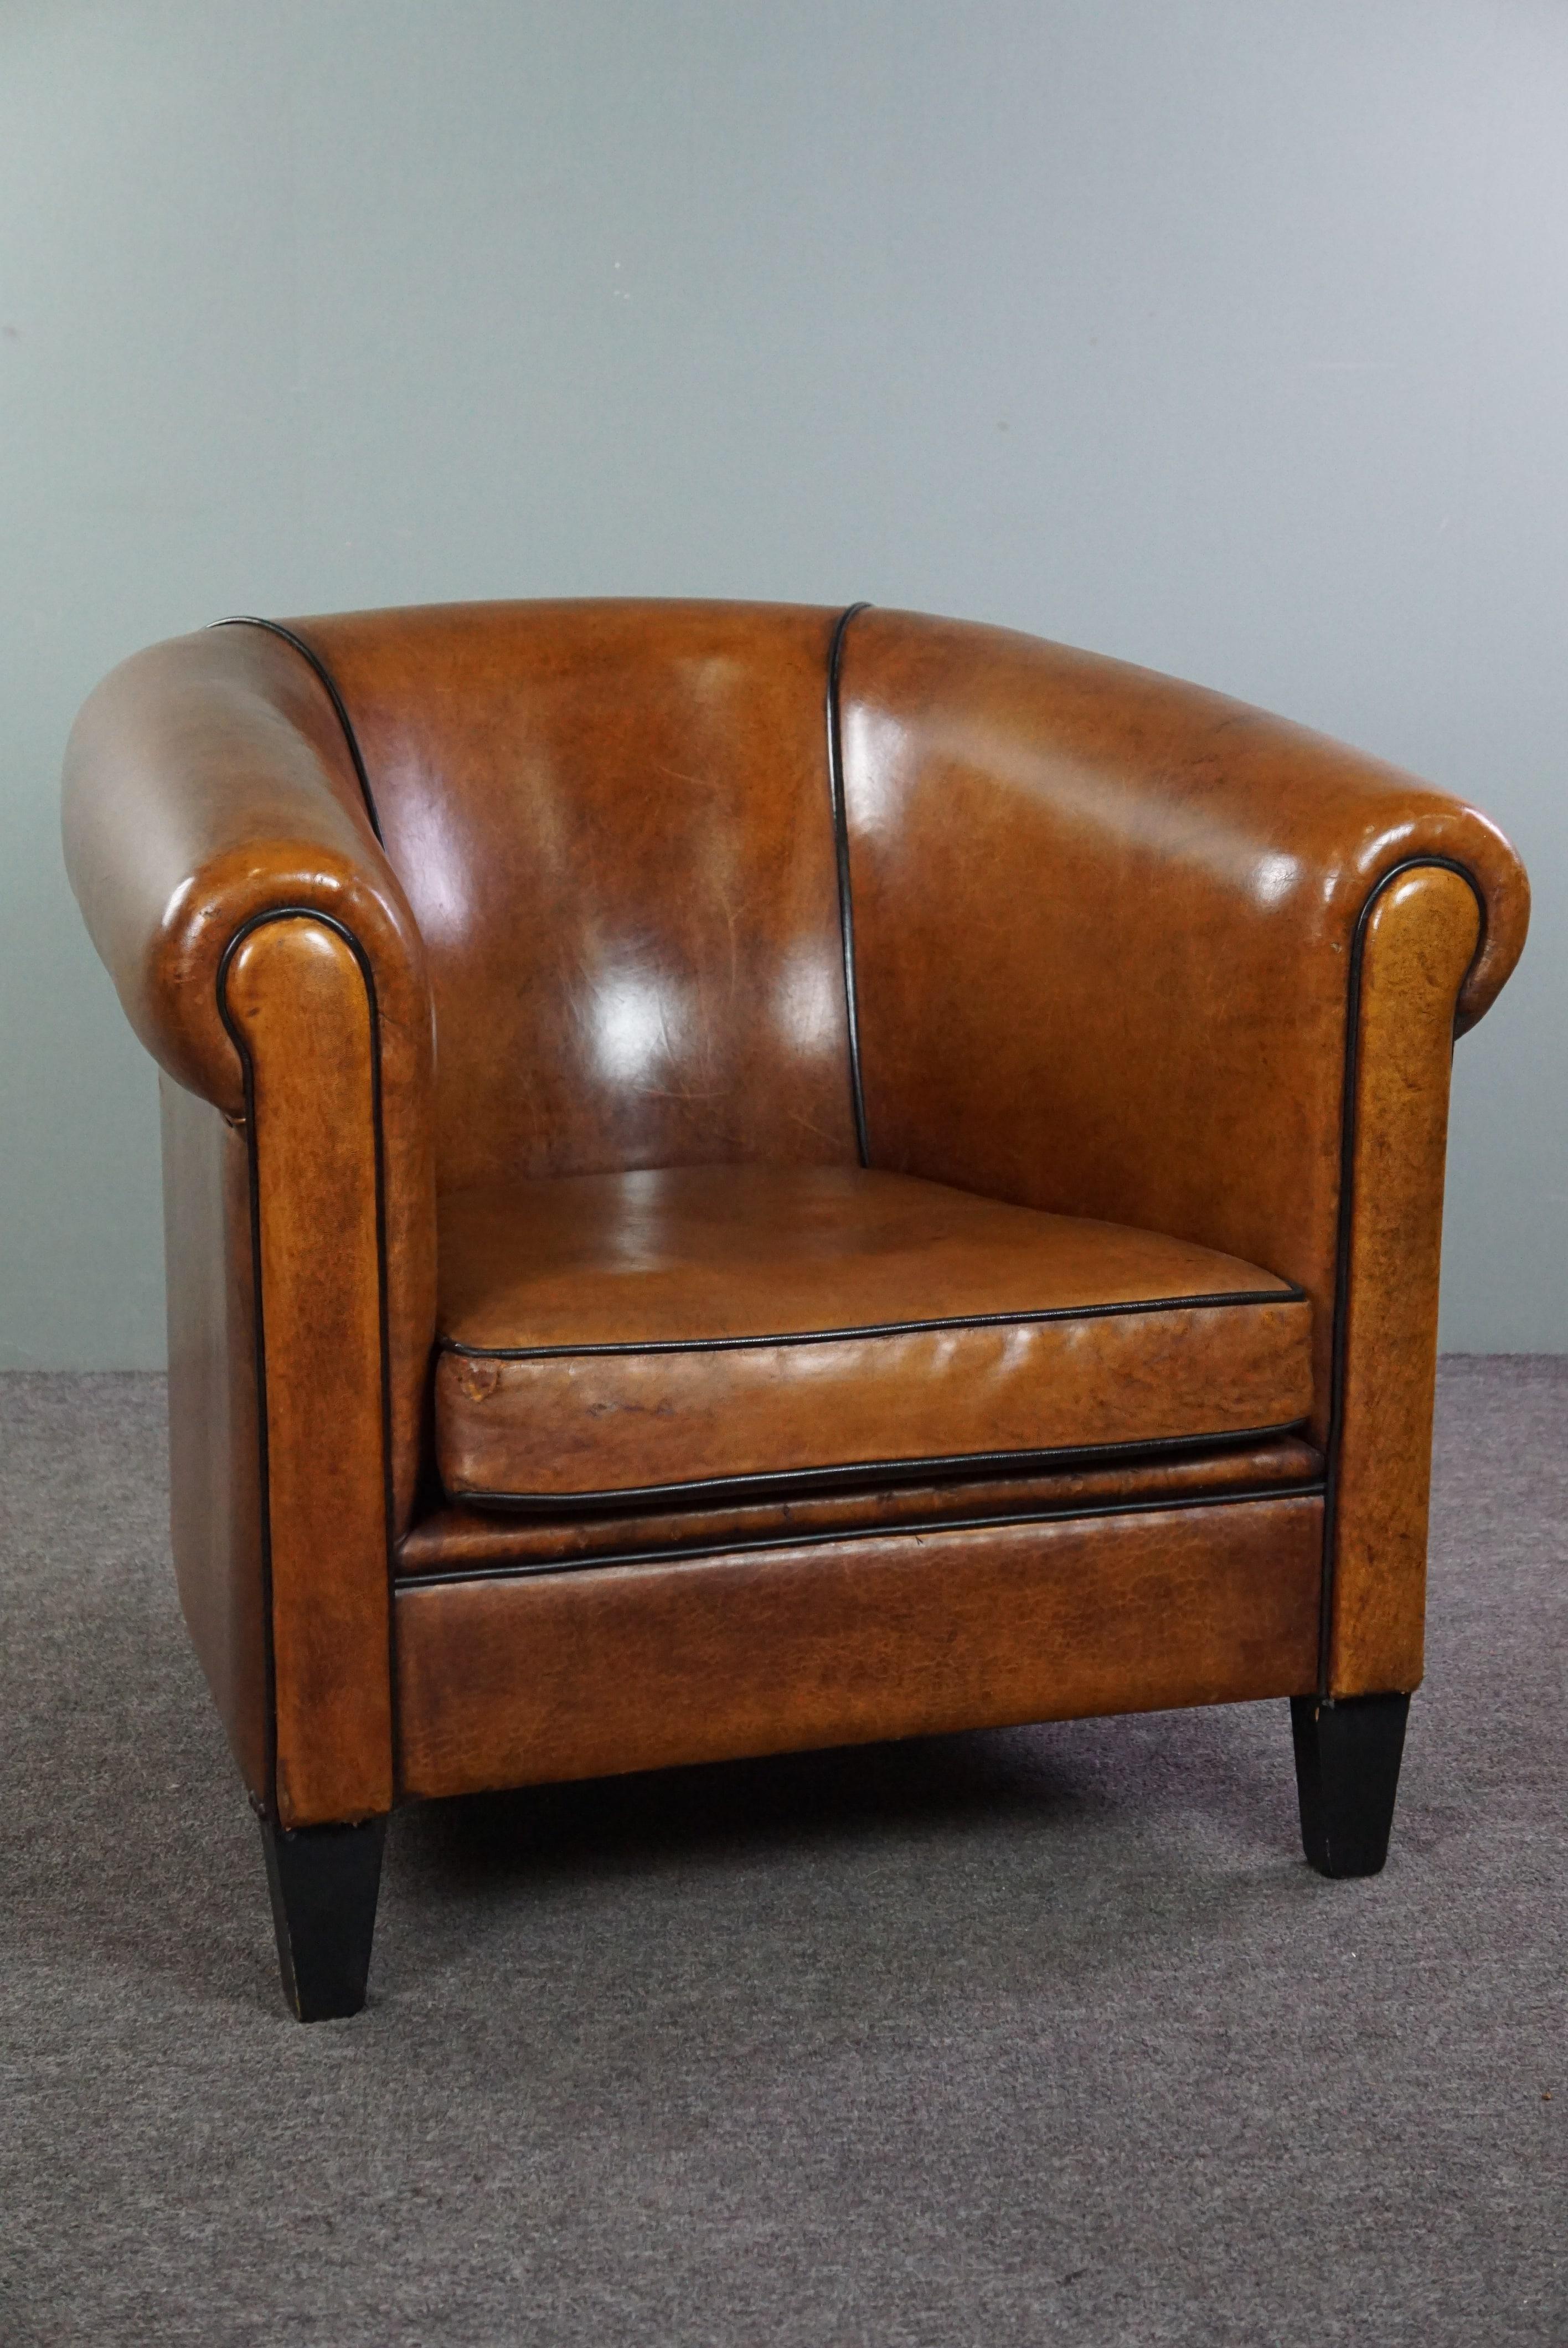 Offered is this beautiful large sheep leather club chair finished with a black piping of very good quality.

This beautiful sheep leather club chair has acquired a beautiful patina through responsible use. Apart from the visible signs of wear, it is